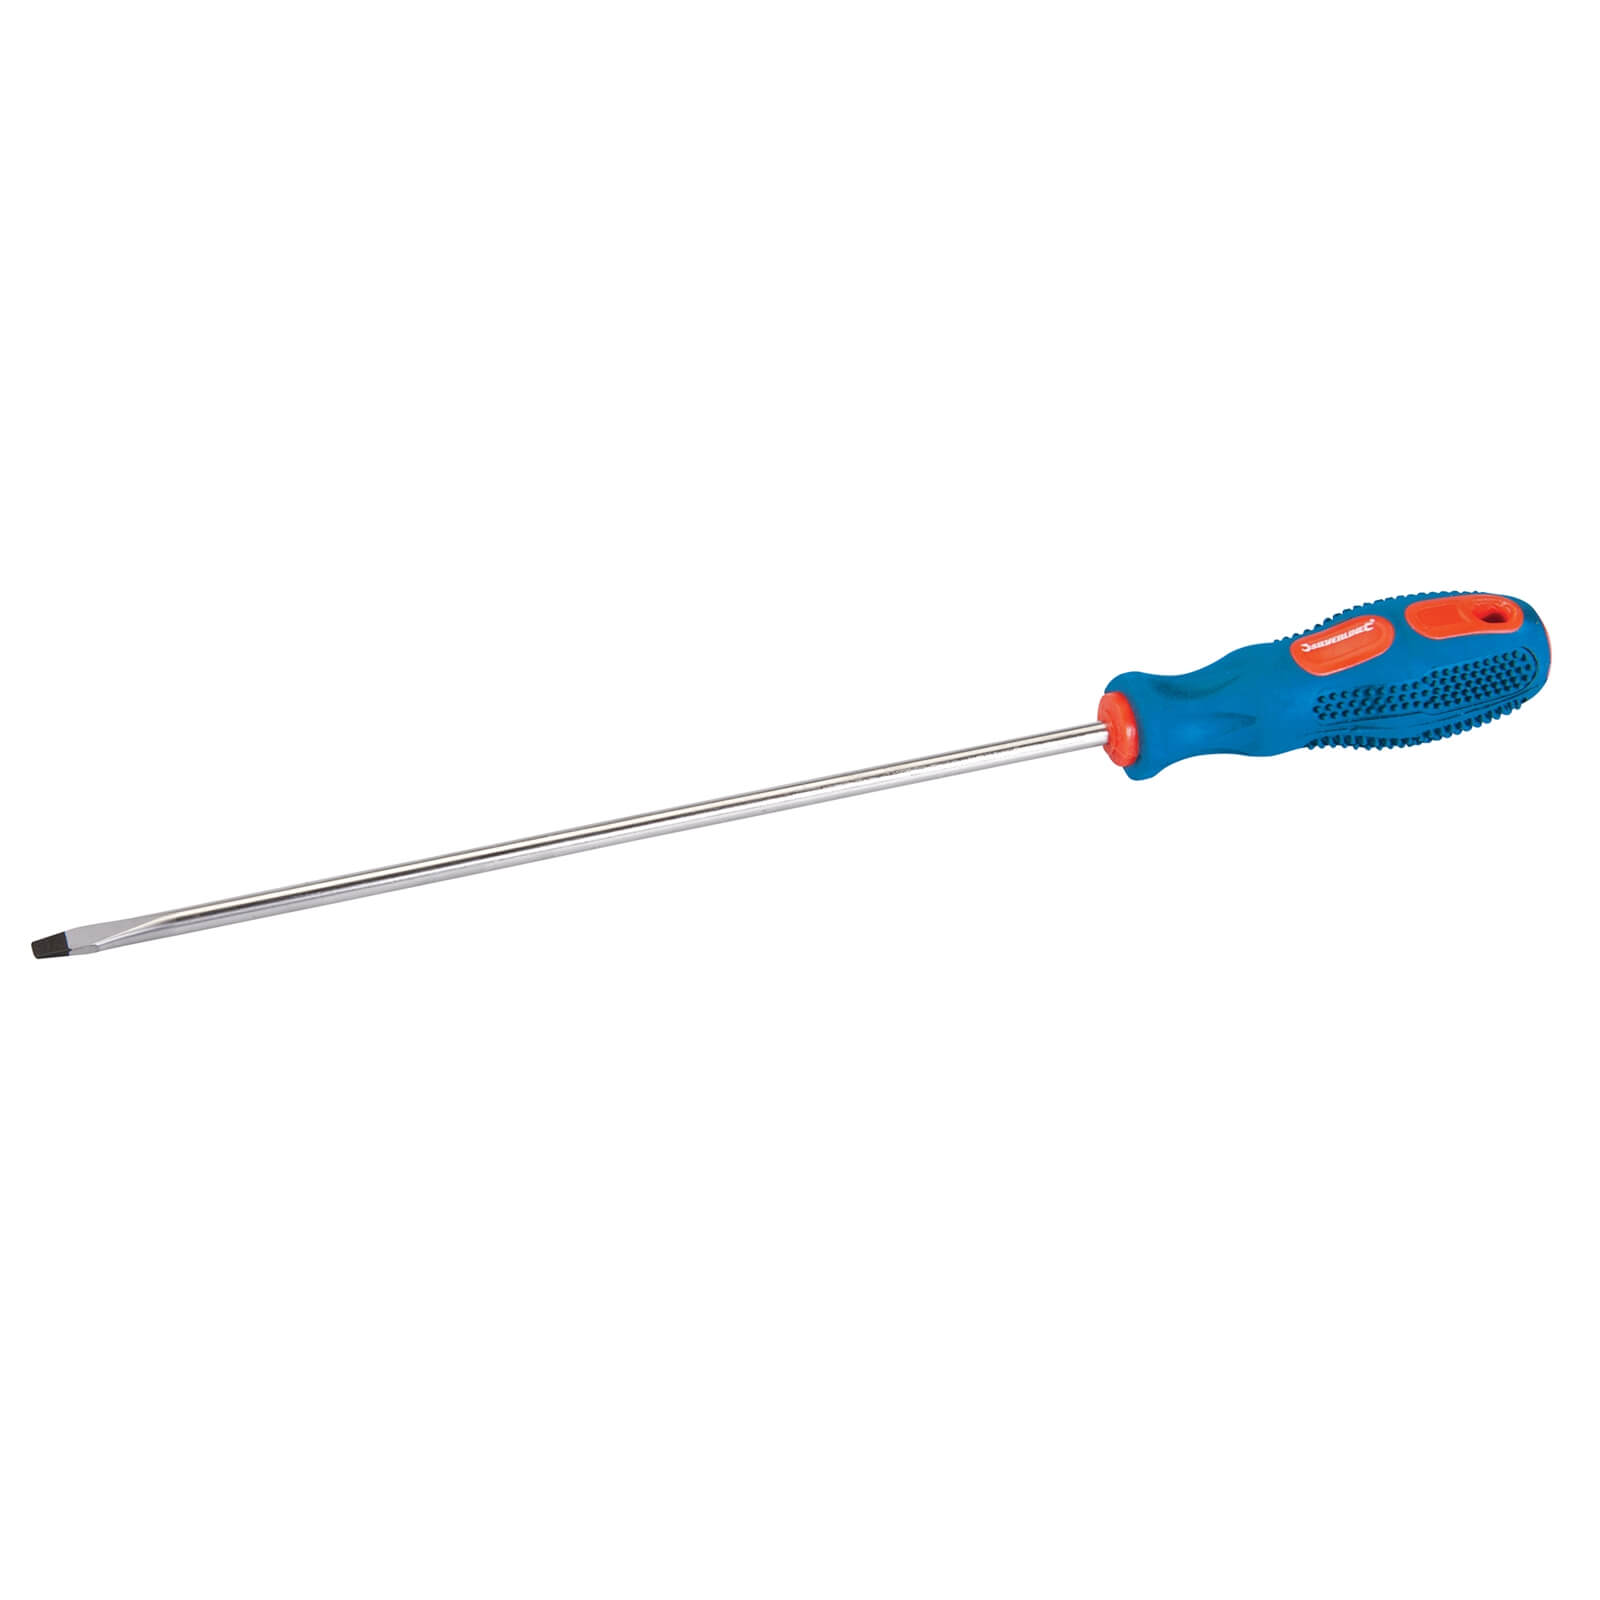 Silverline General Purpose Screwdriver Slotted Flared 9.5 x 250mm